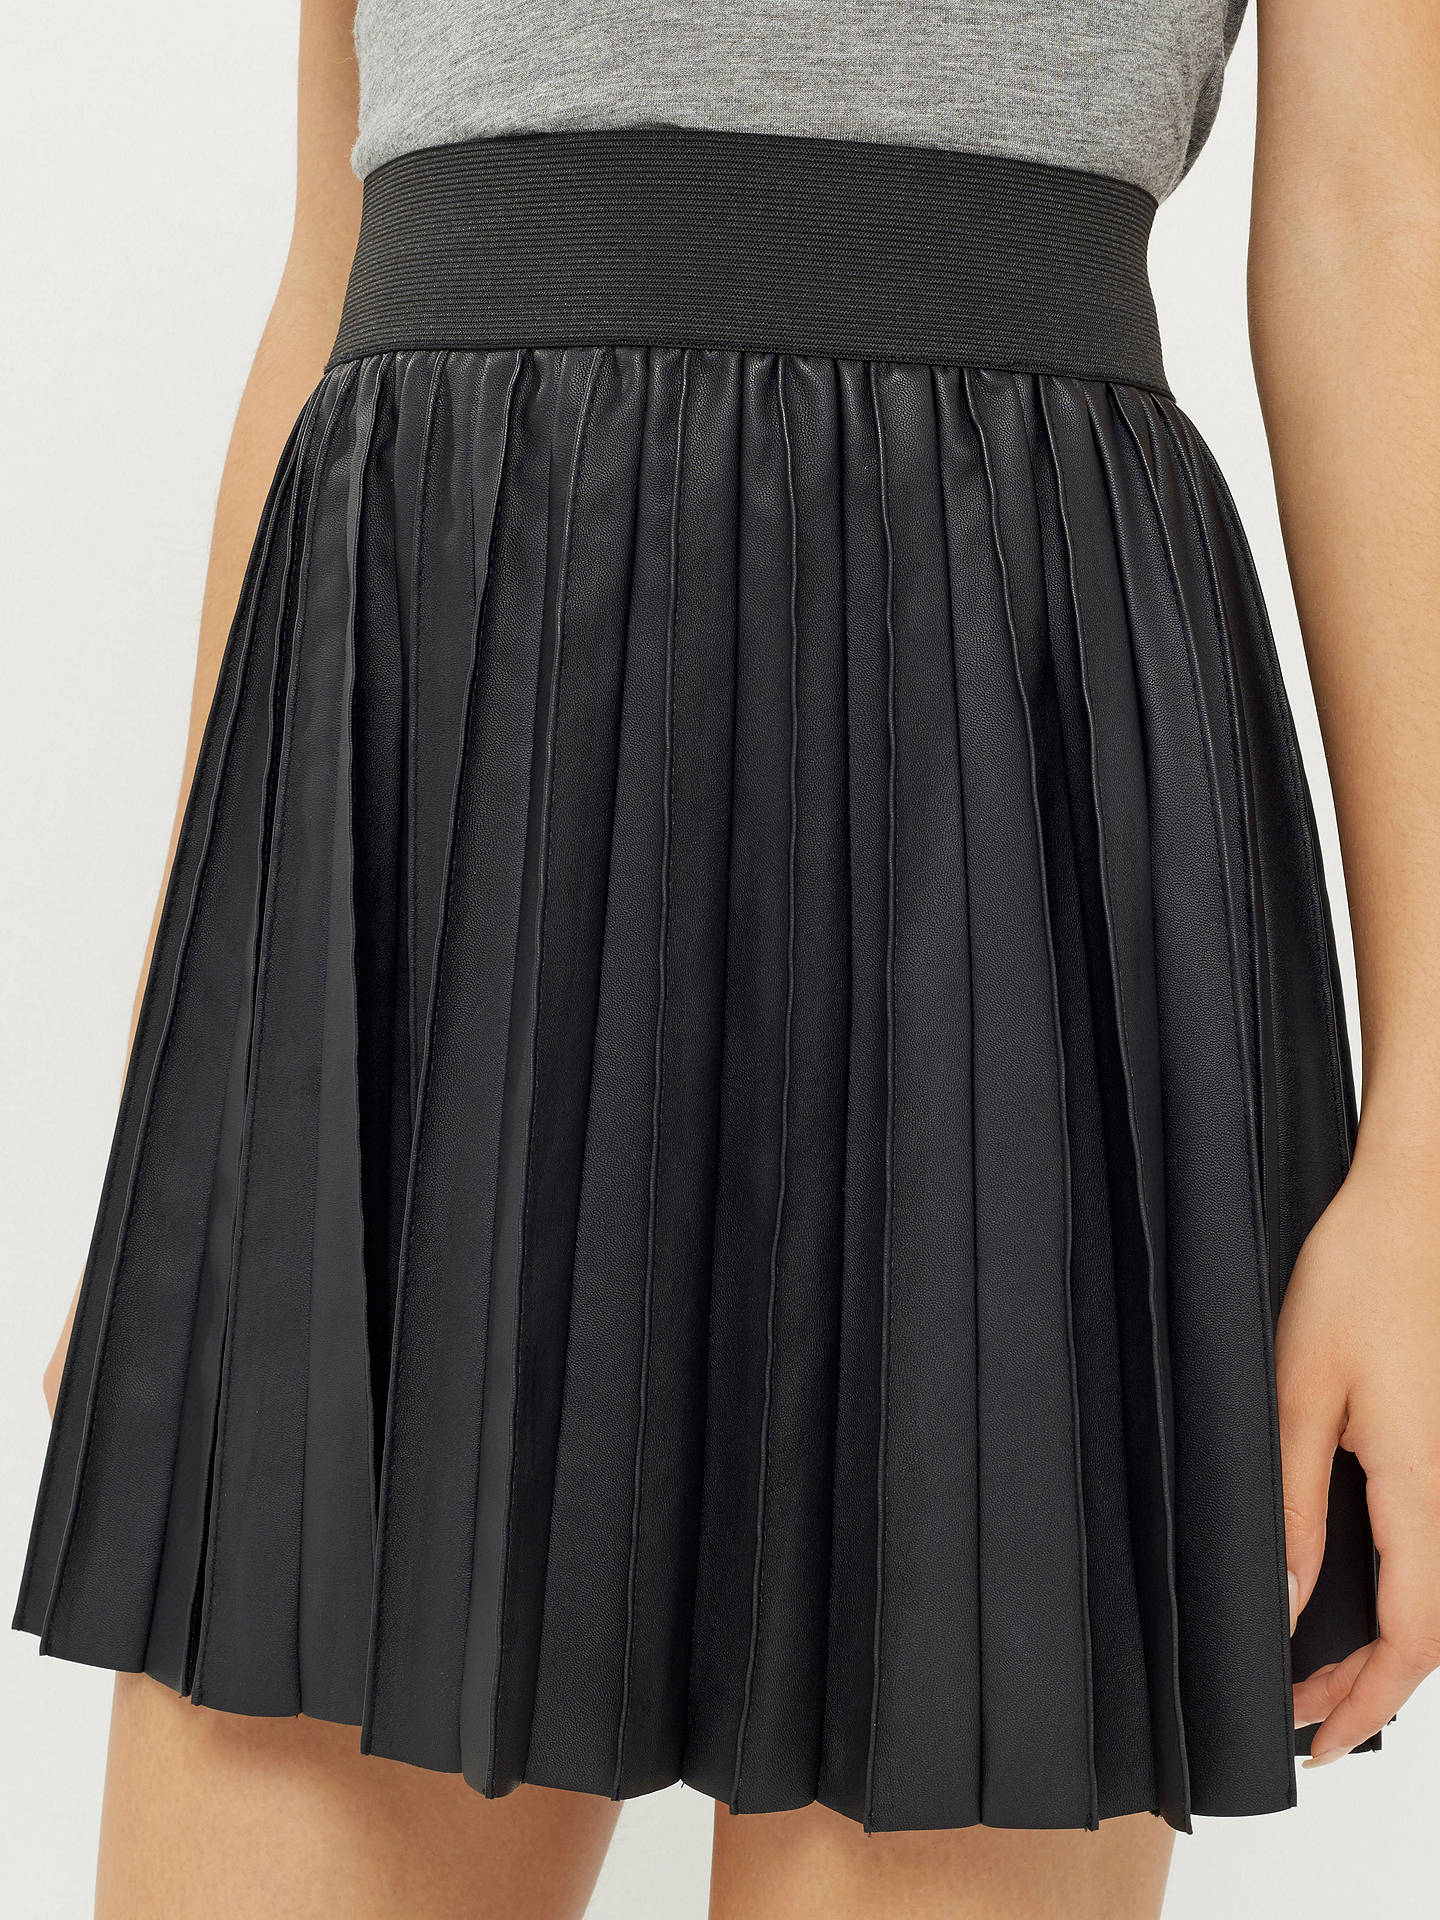 Oasis Pleated Faux Leather Skirt, Black at John Lewis & Partners